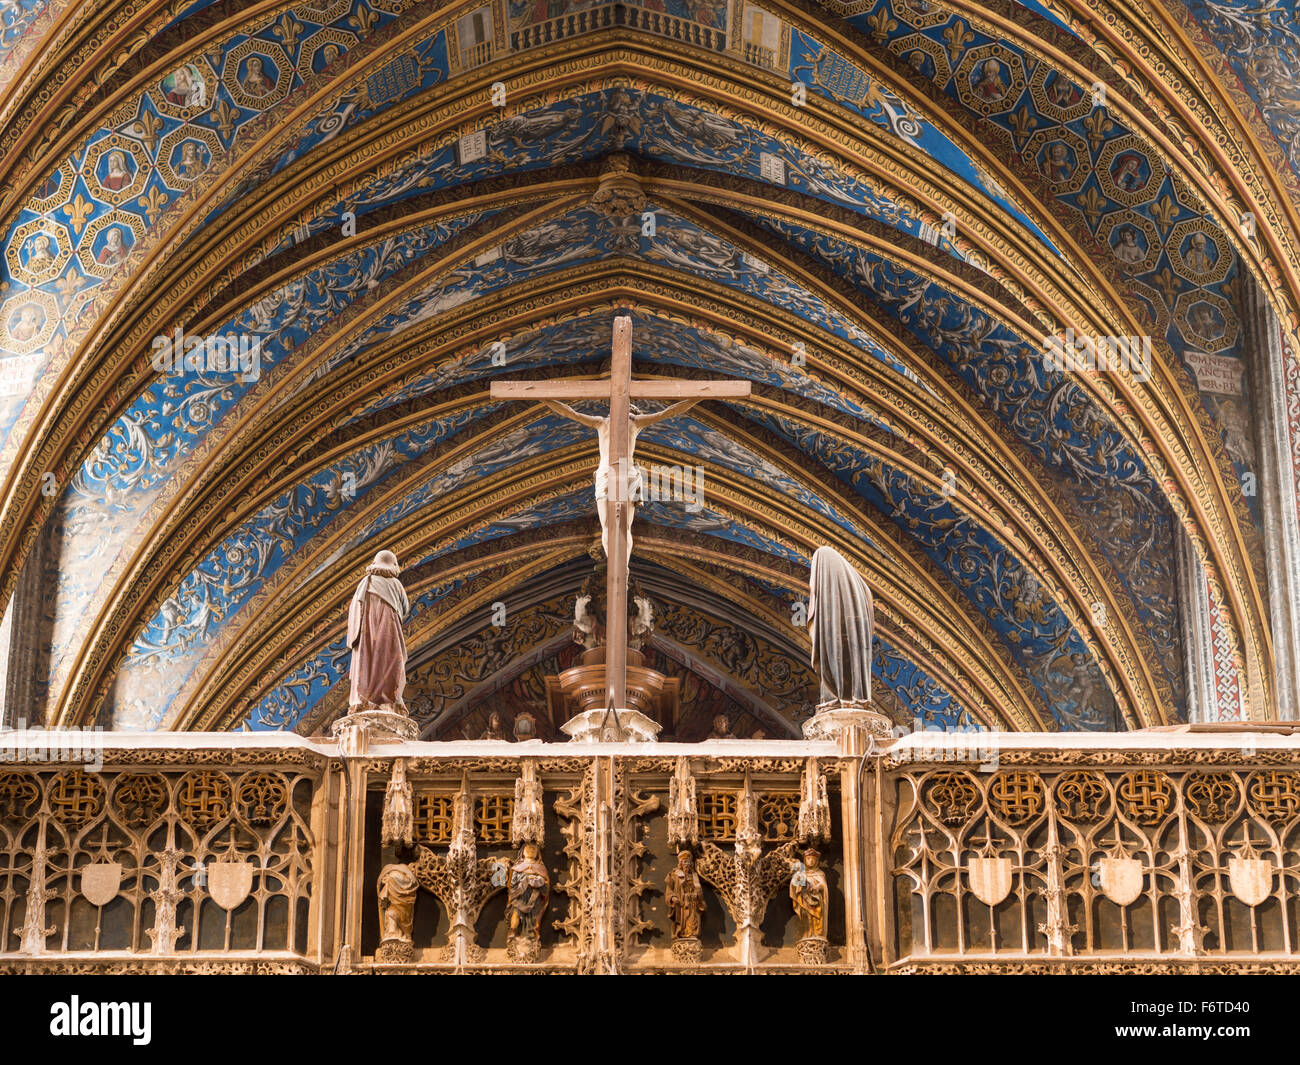 Crucified Christ, Mary and Joseph at Albi. Statues of Christ on the cross flanked by Mary and Joseph from their rear and inside Stock Photo